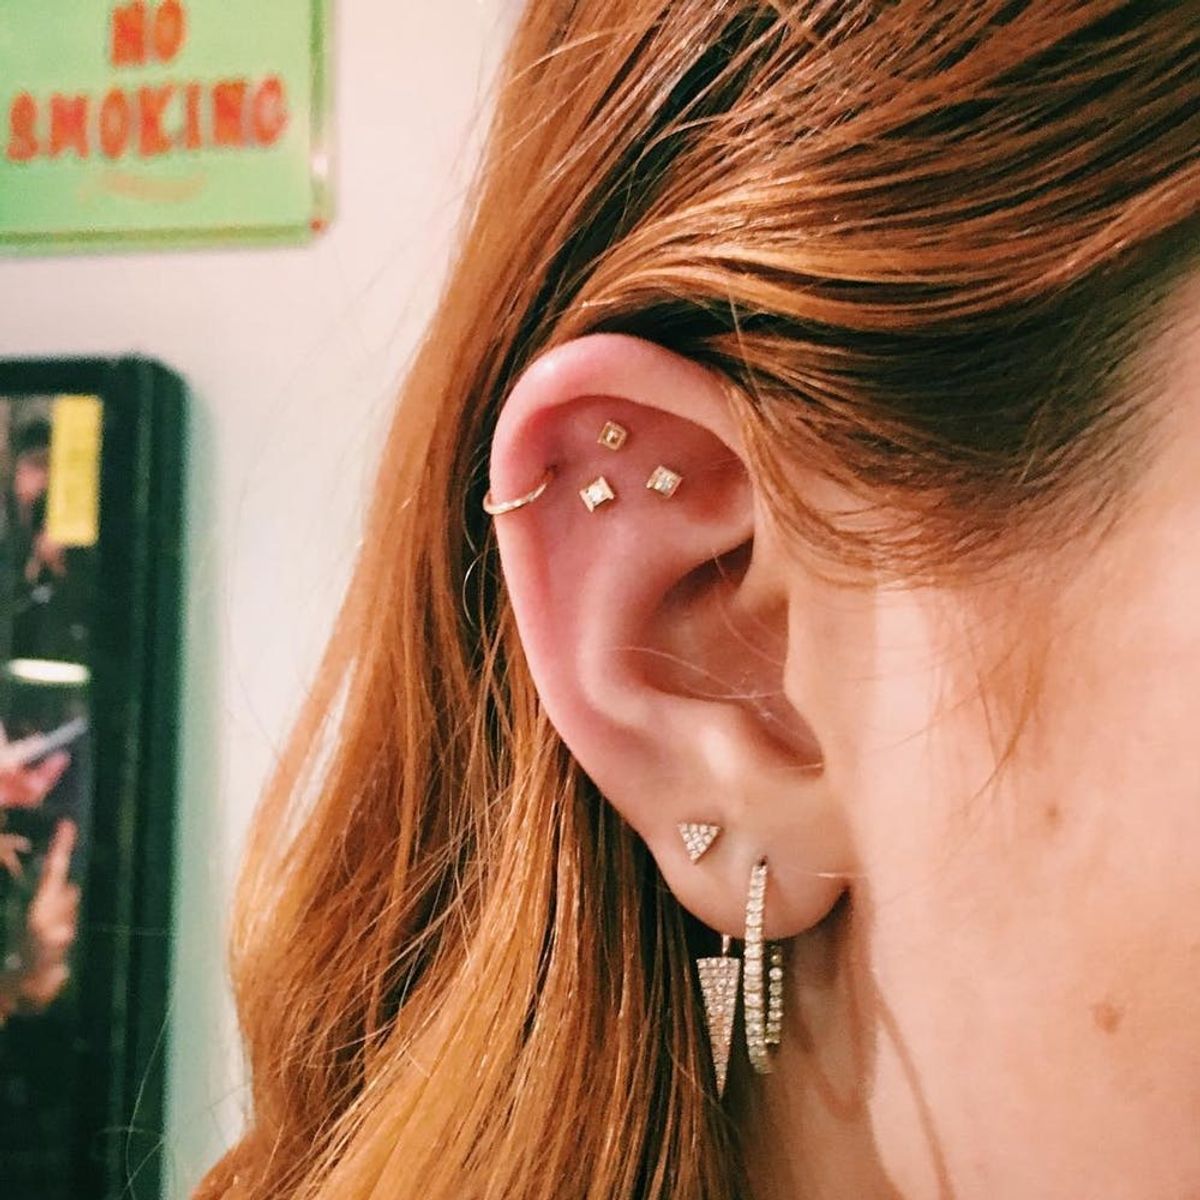 11 Constellation Piercings That’ll Instantly Upgrade Your Ear Game